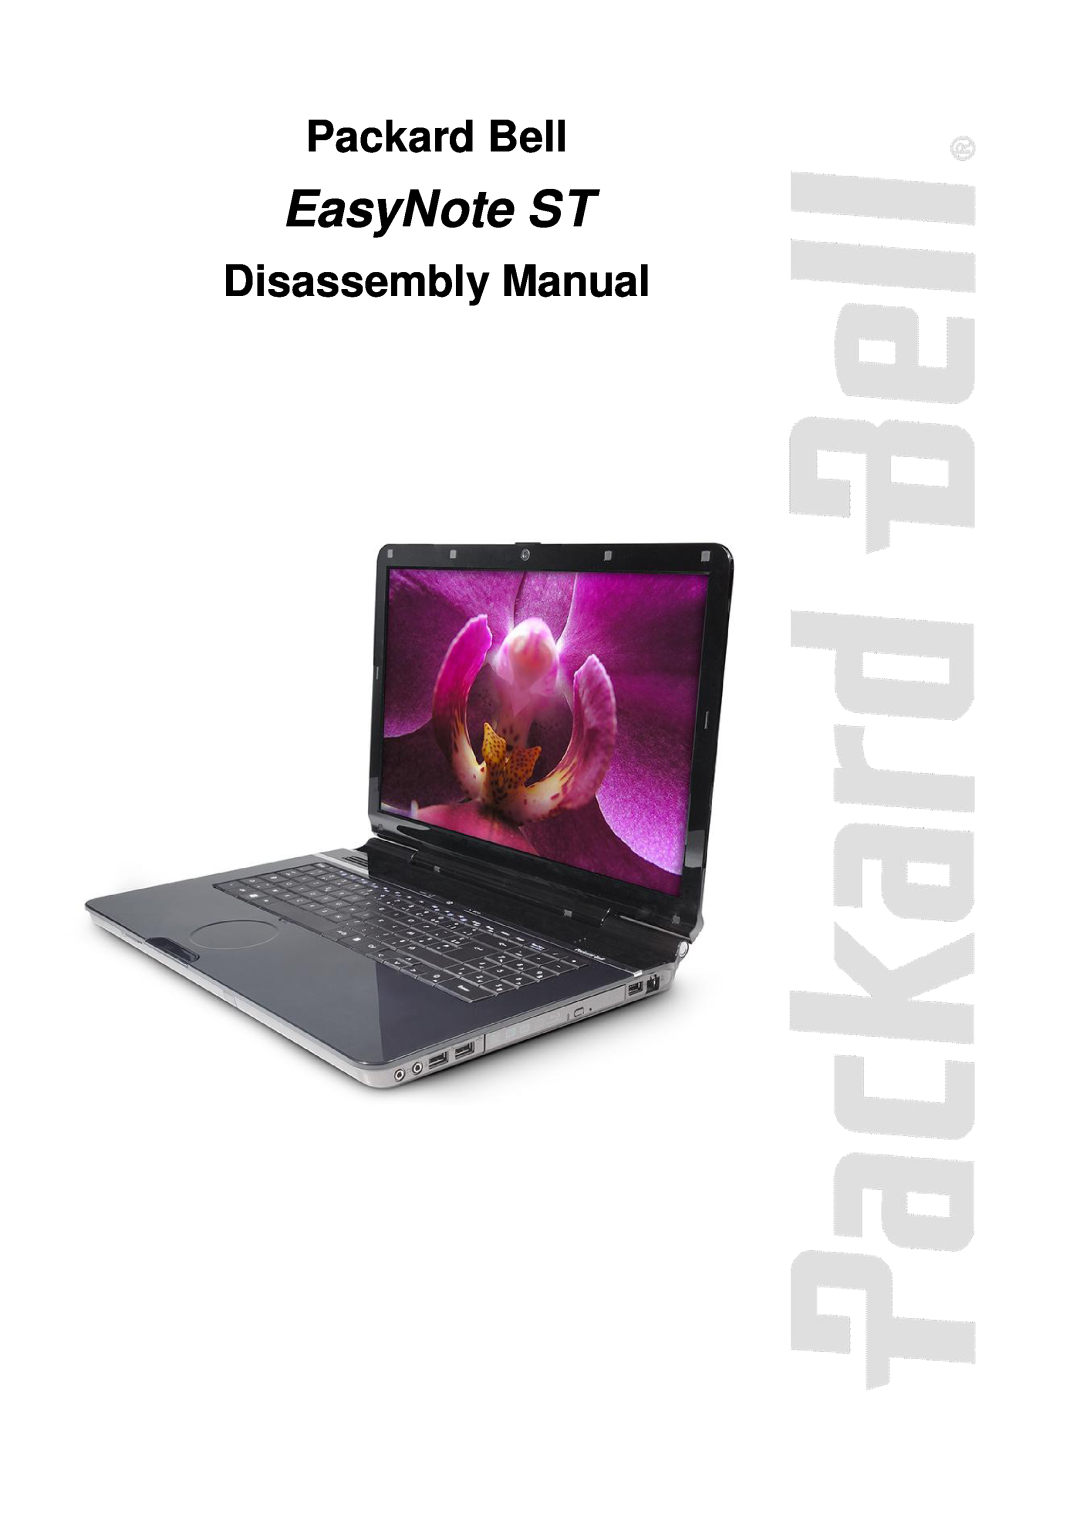 Packard Bell manual EasyNote ST, Packard Bell, Disassembly Manual 